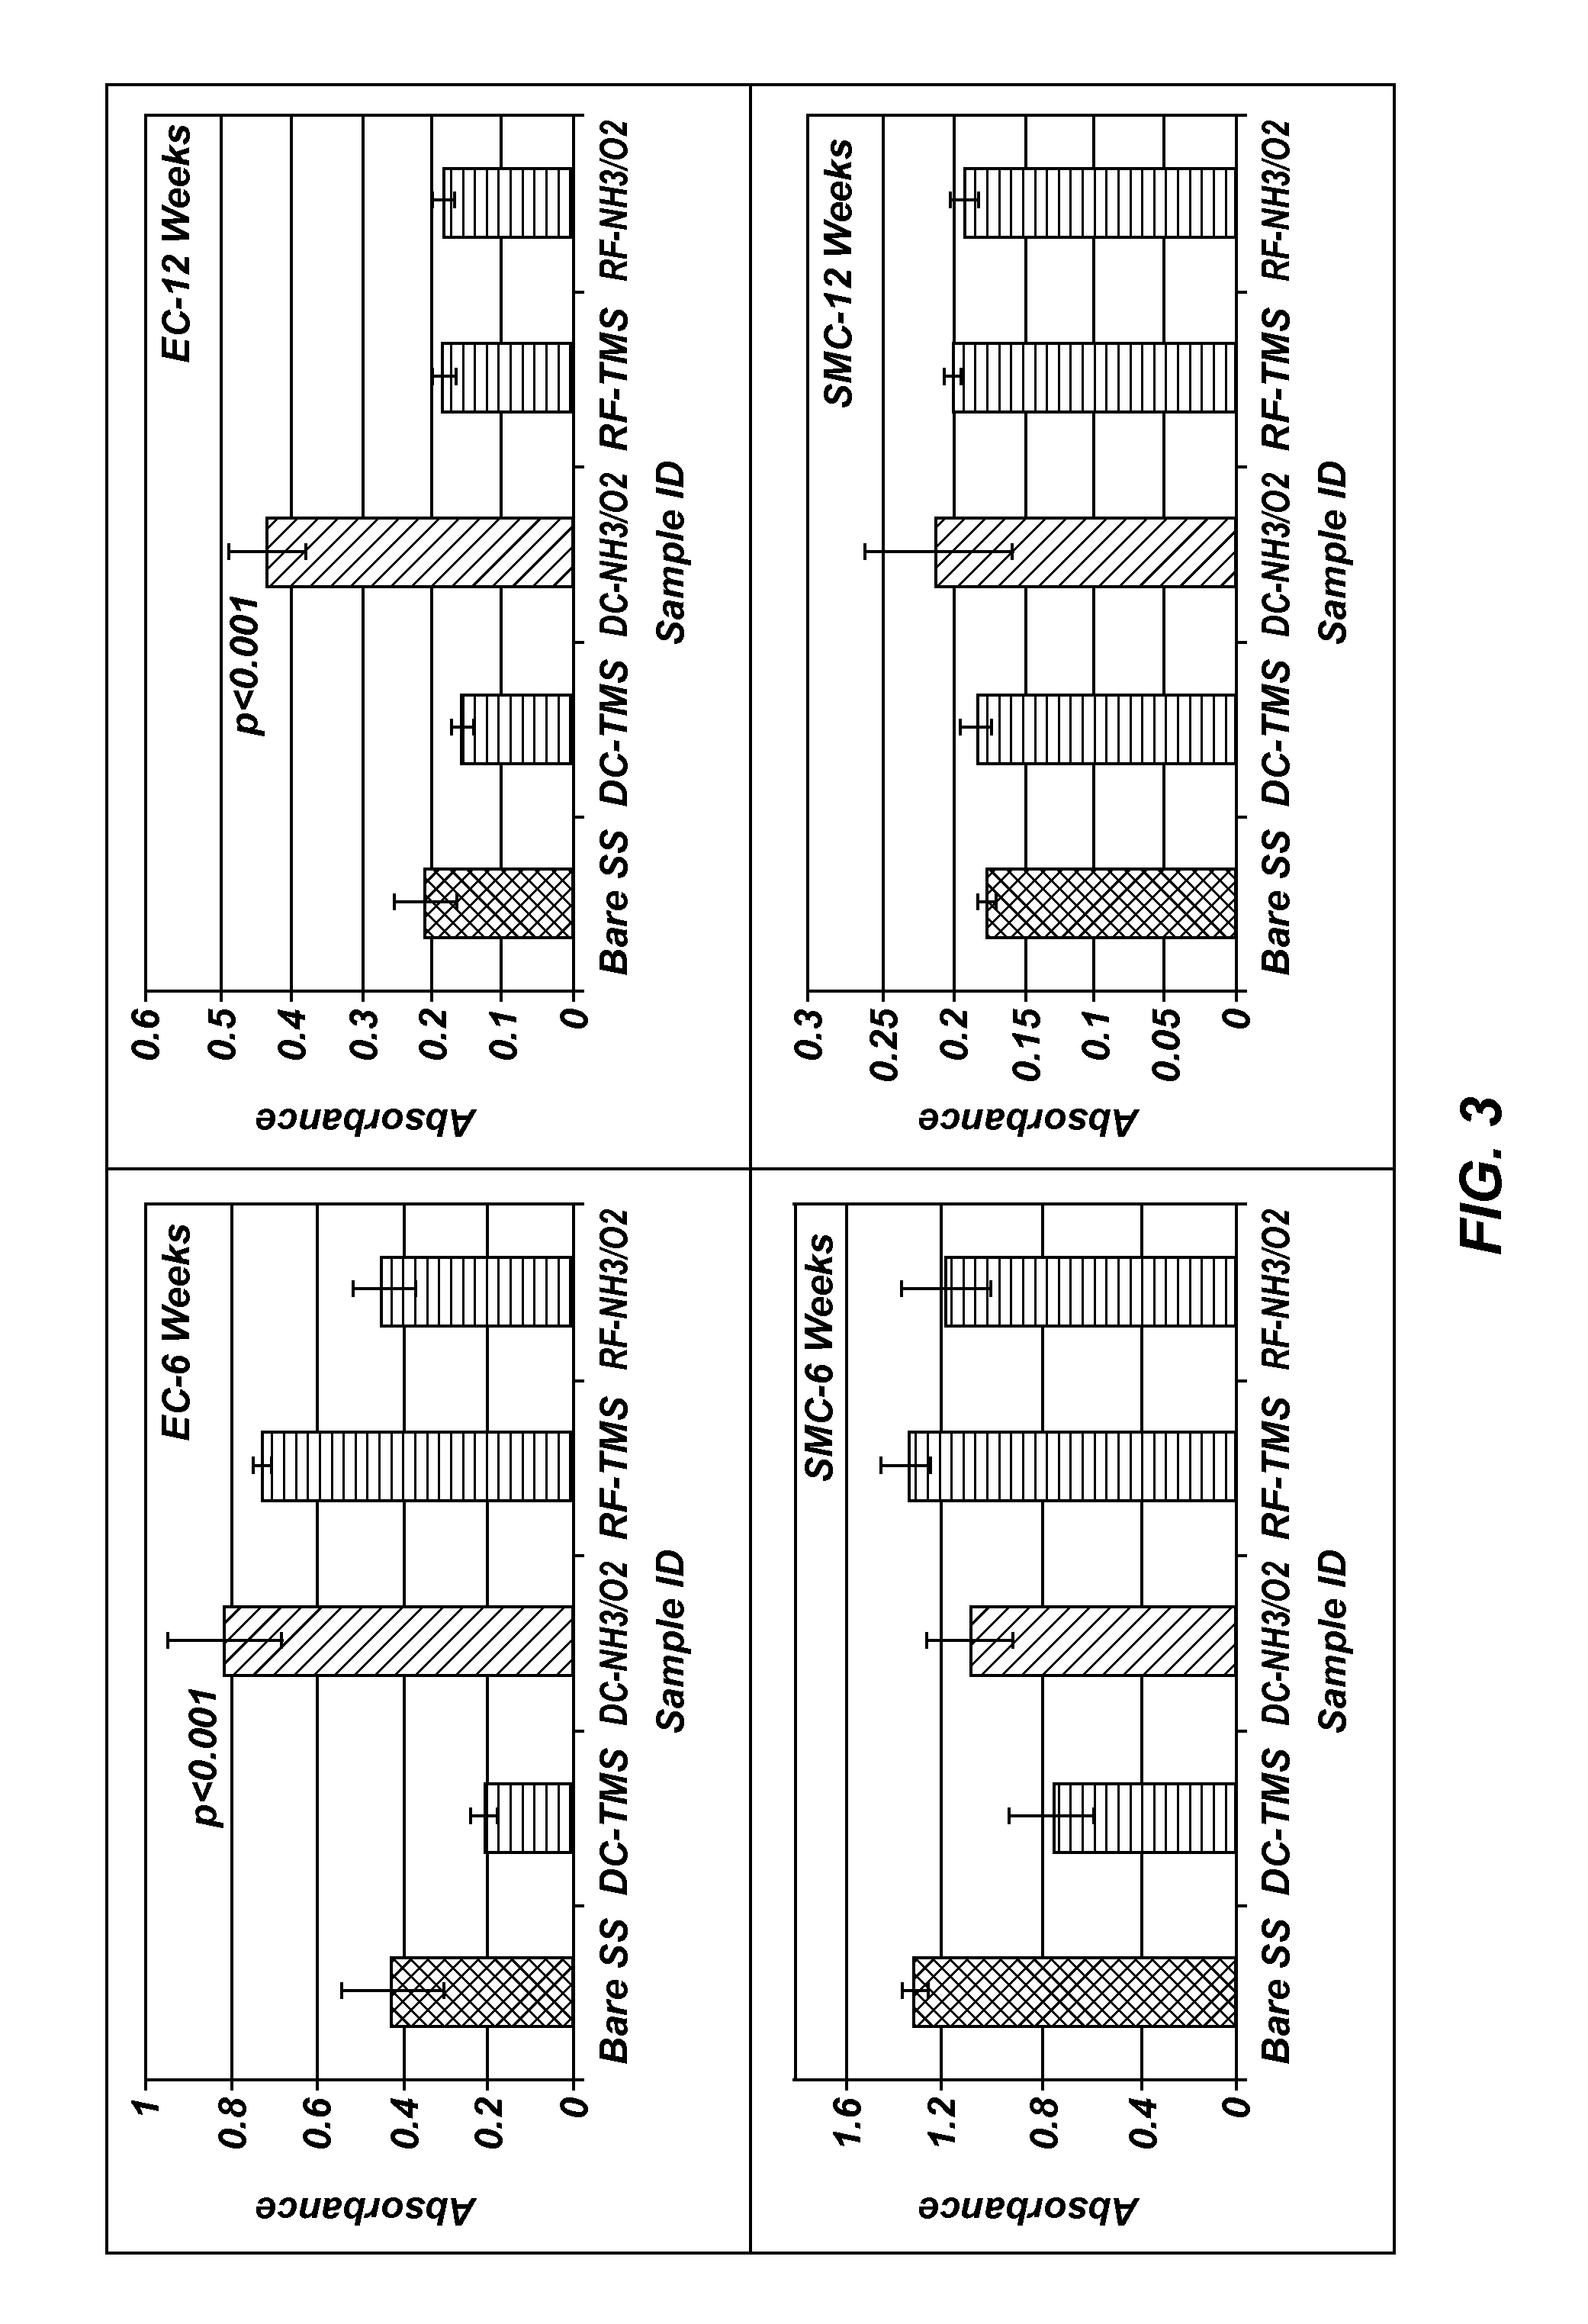 Plasma modified medical devices and methods